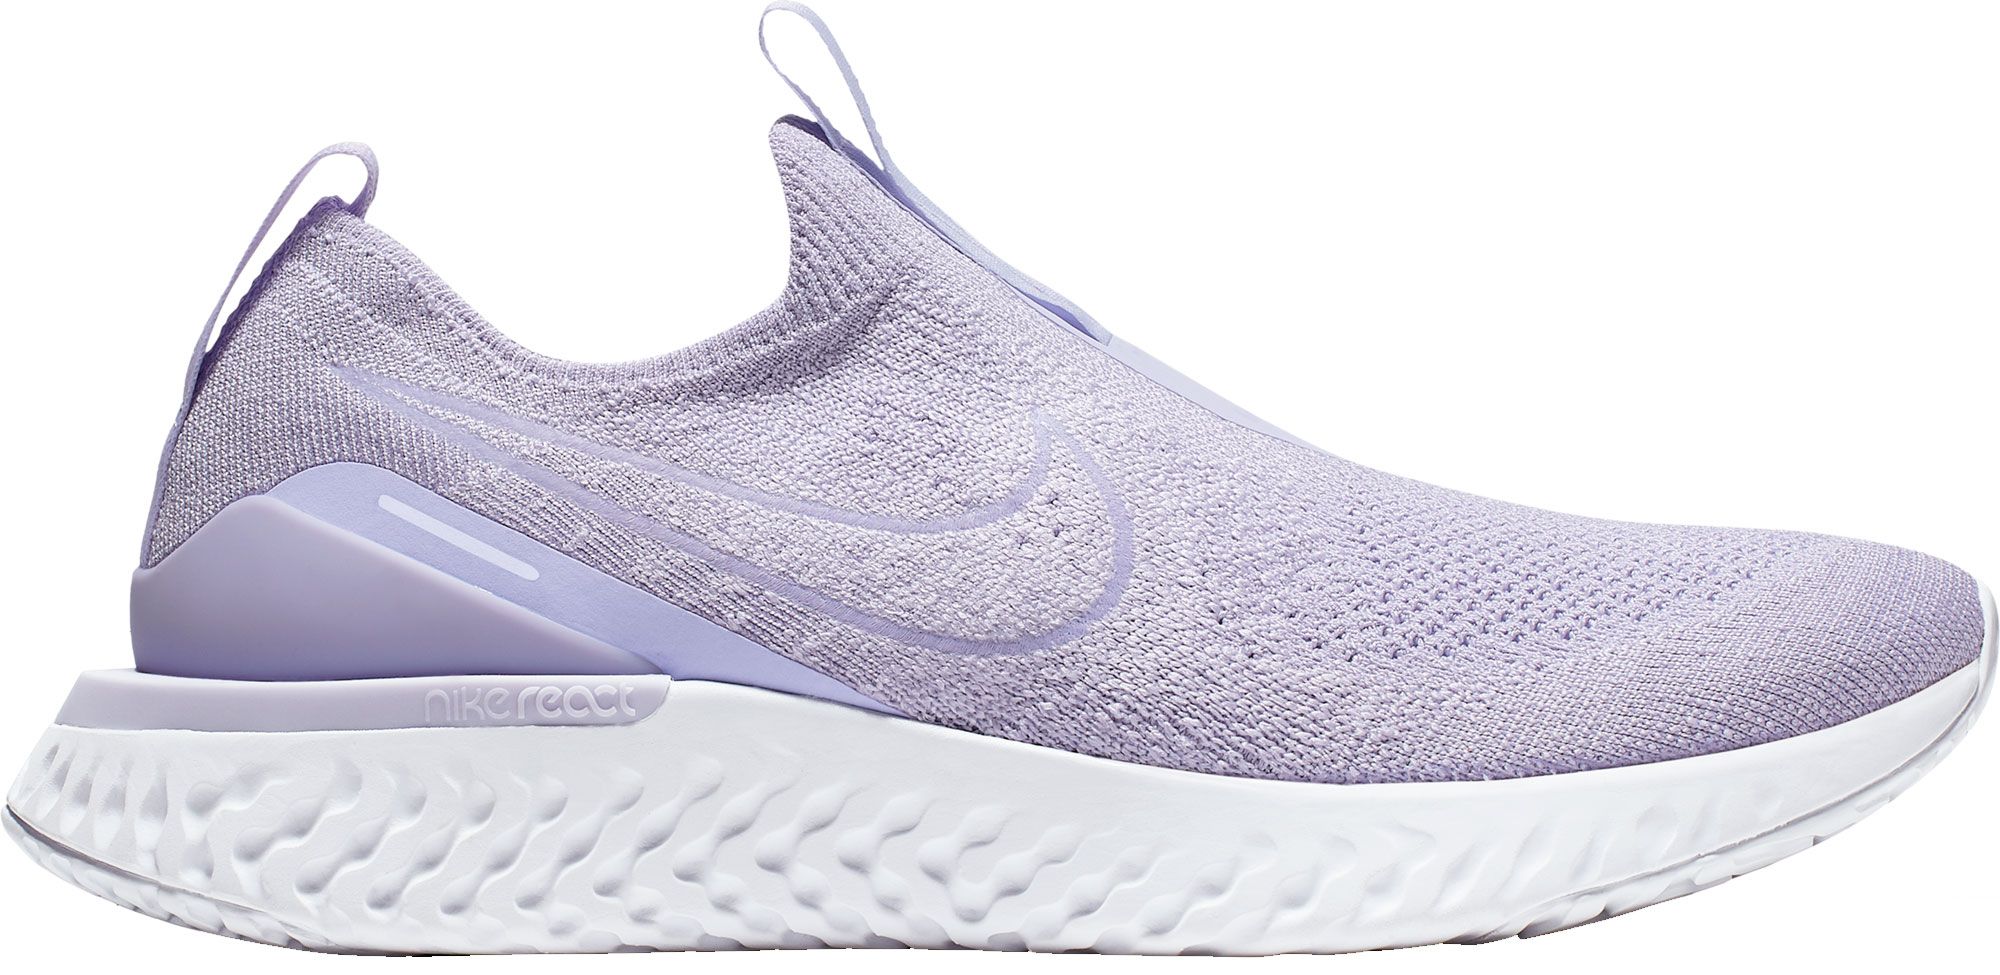 Purple Nike Shoes | Best Price Guarantee at DICK'S